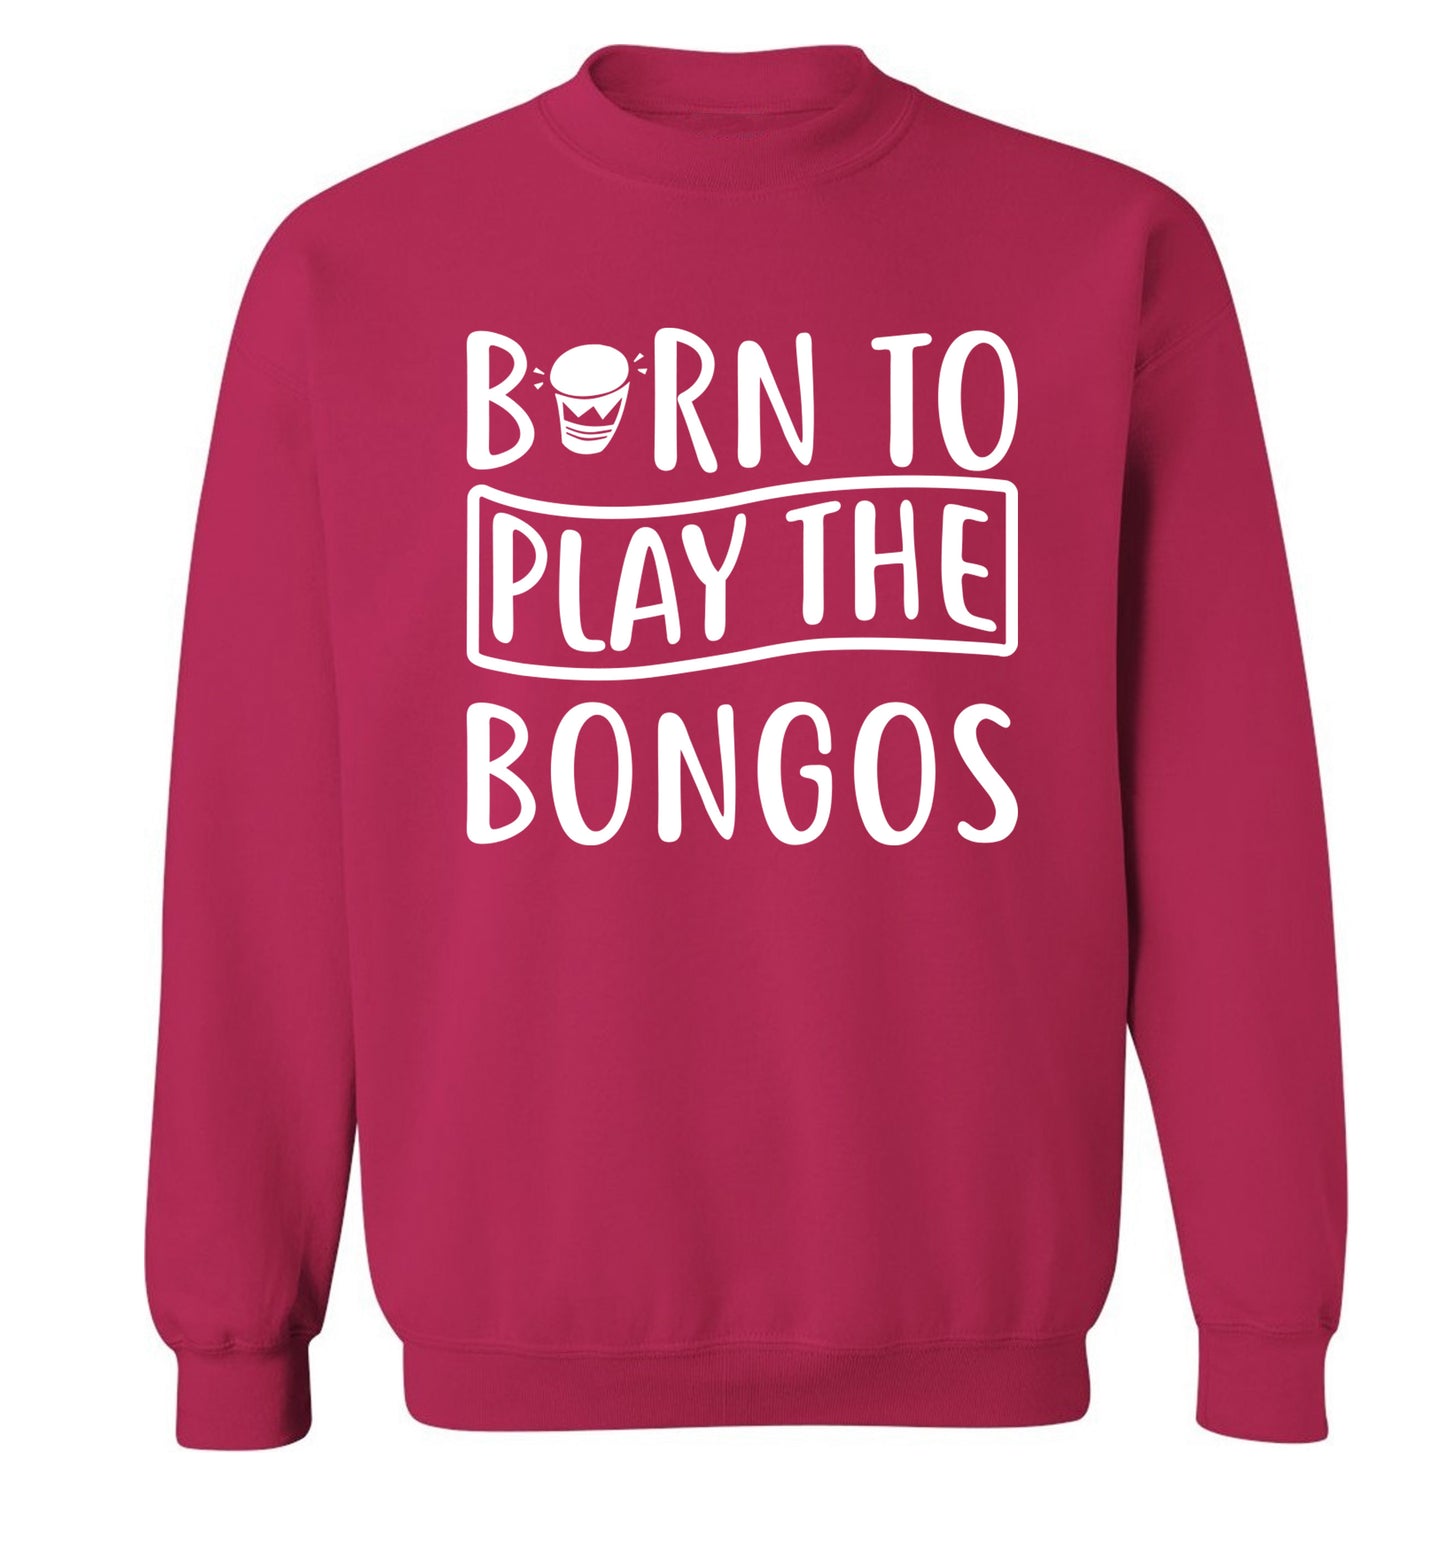 Born to play the bongos Adult's unisex pink Sweater 2XL